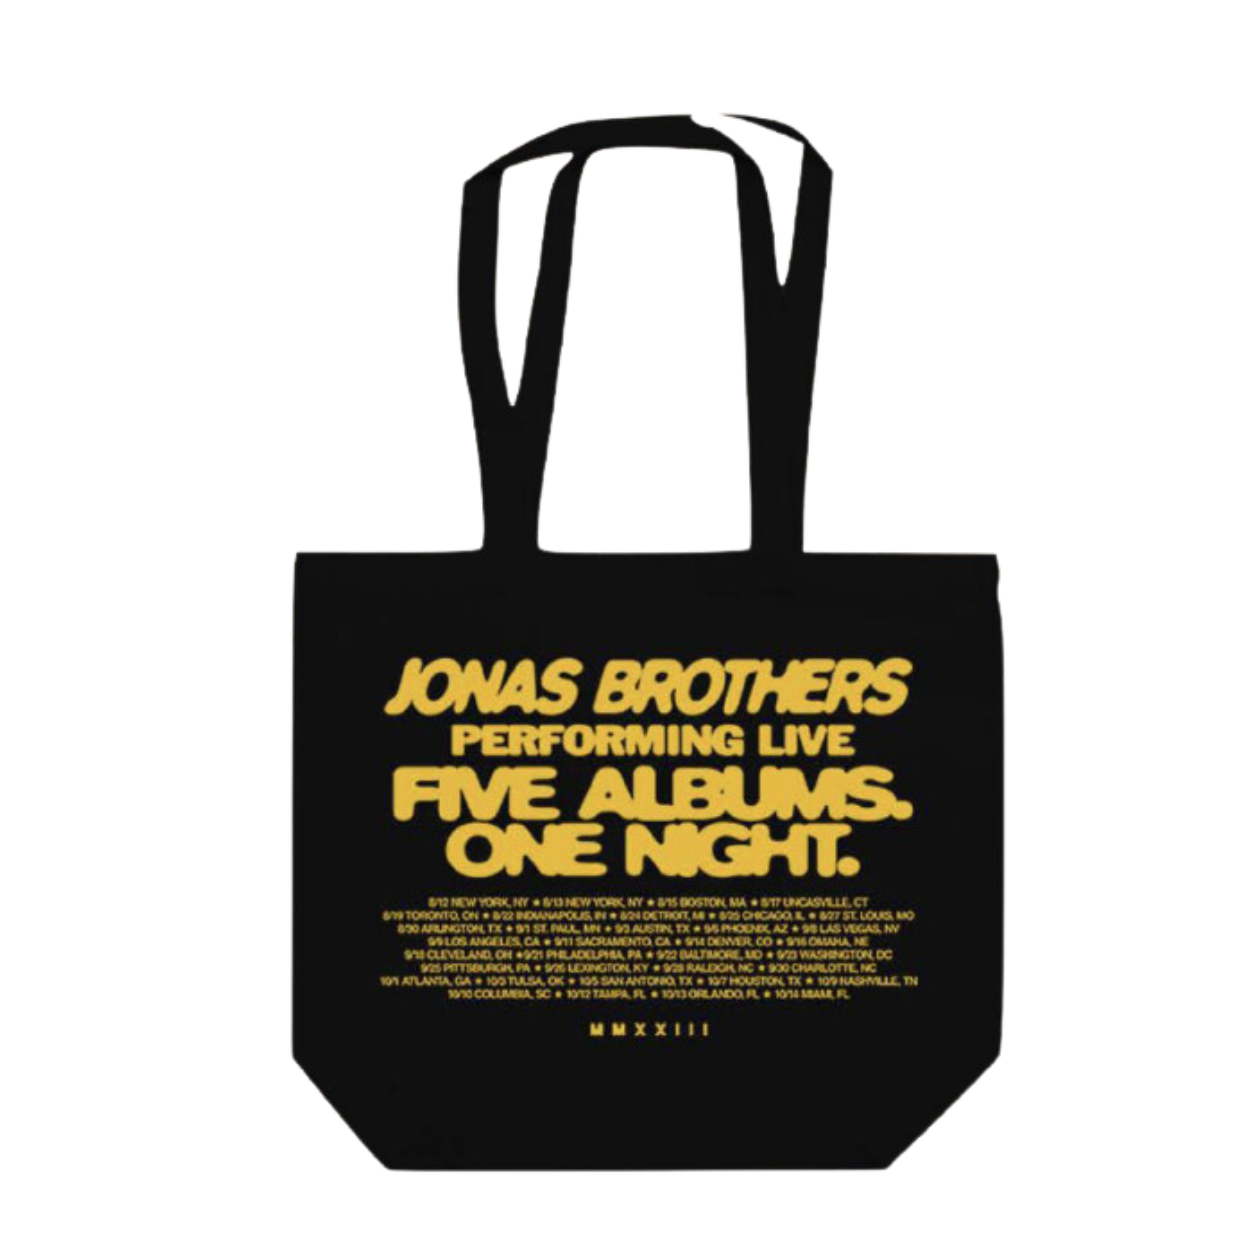 FIVE ALBUMBS ONE NIGHT TOTE - Pop-Up